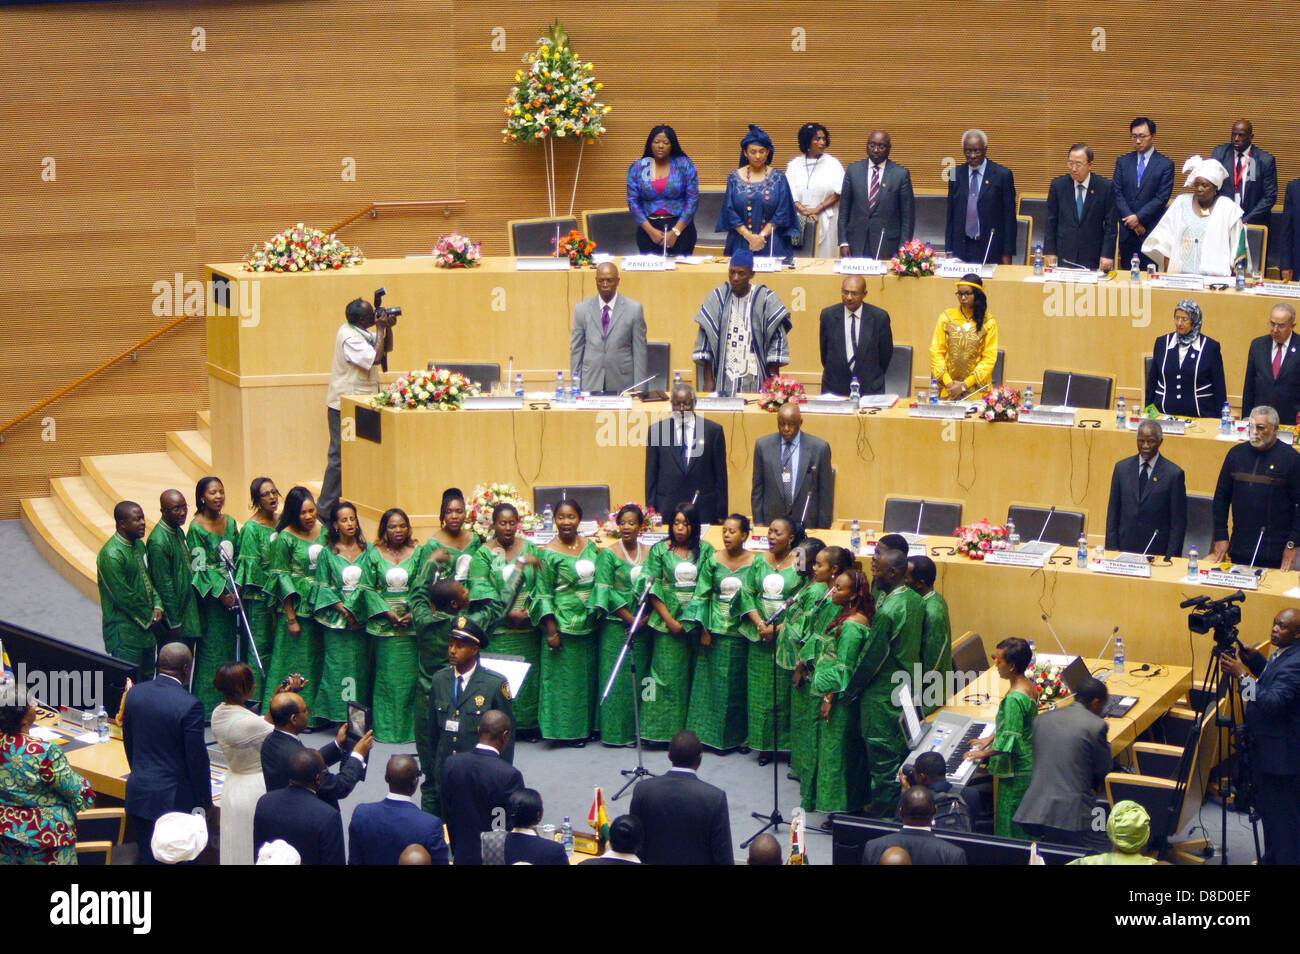 A choir sings the anthom of the African Union (AU) during a celebration of the 50th anniversary of the African Union in Addis Abeba, Ethiopia, 25 May 2013. Photo: Carola Frentzen Stock Photo